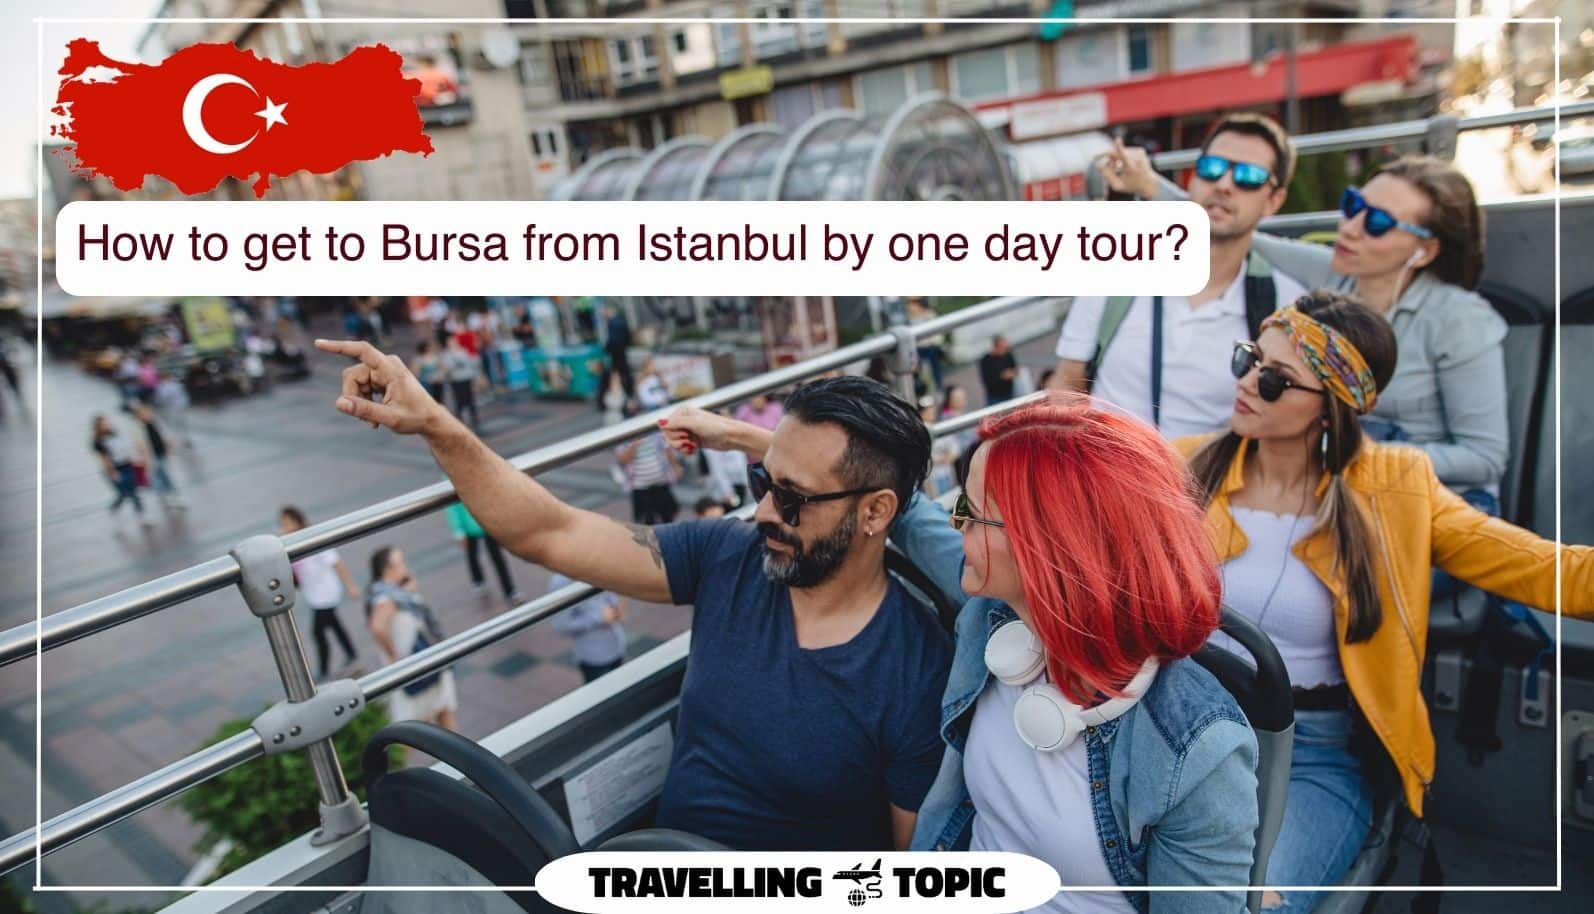 How to get to Bursa from Istanbul by one day tour